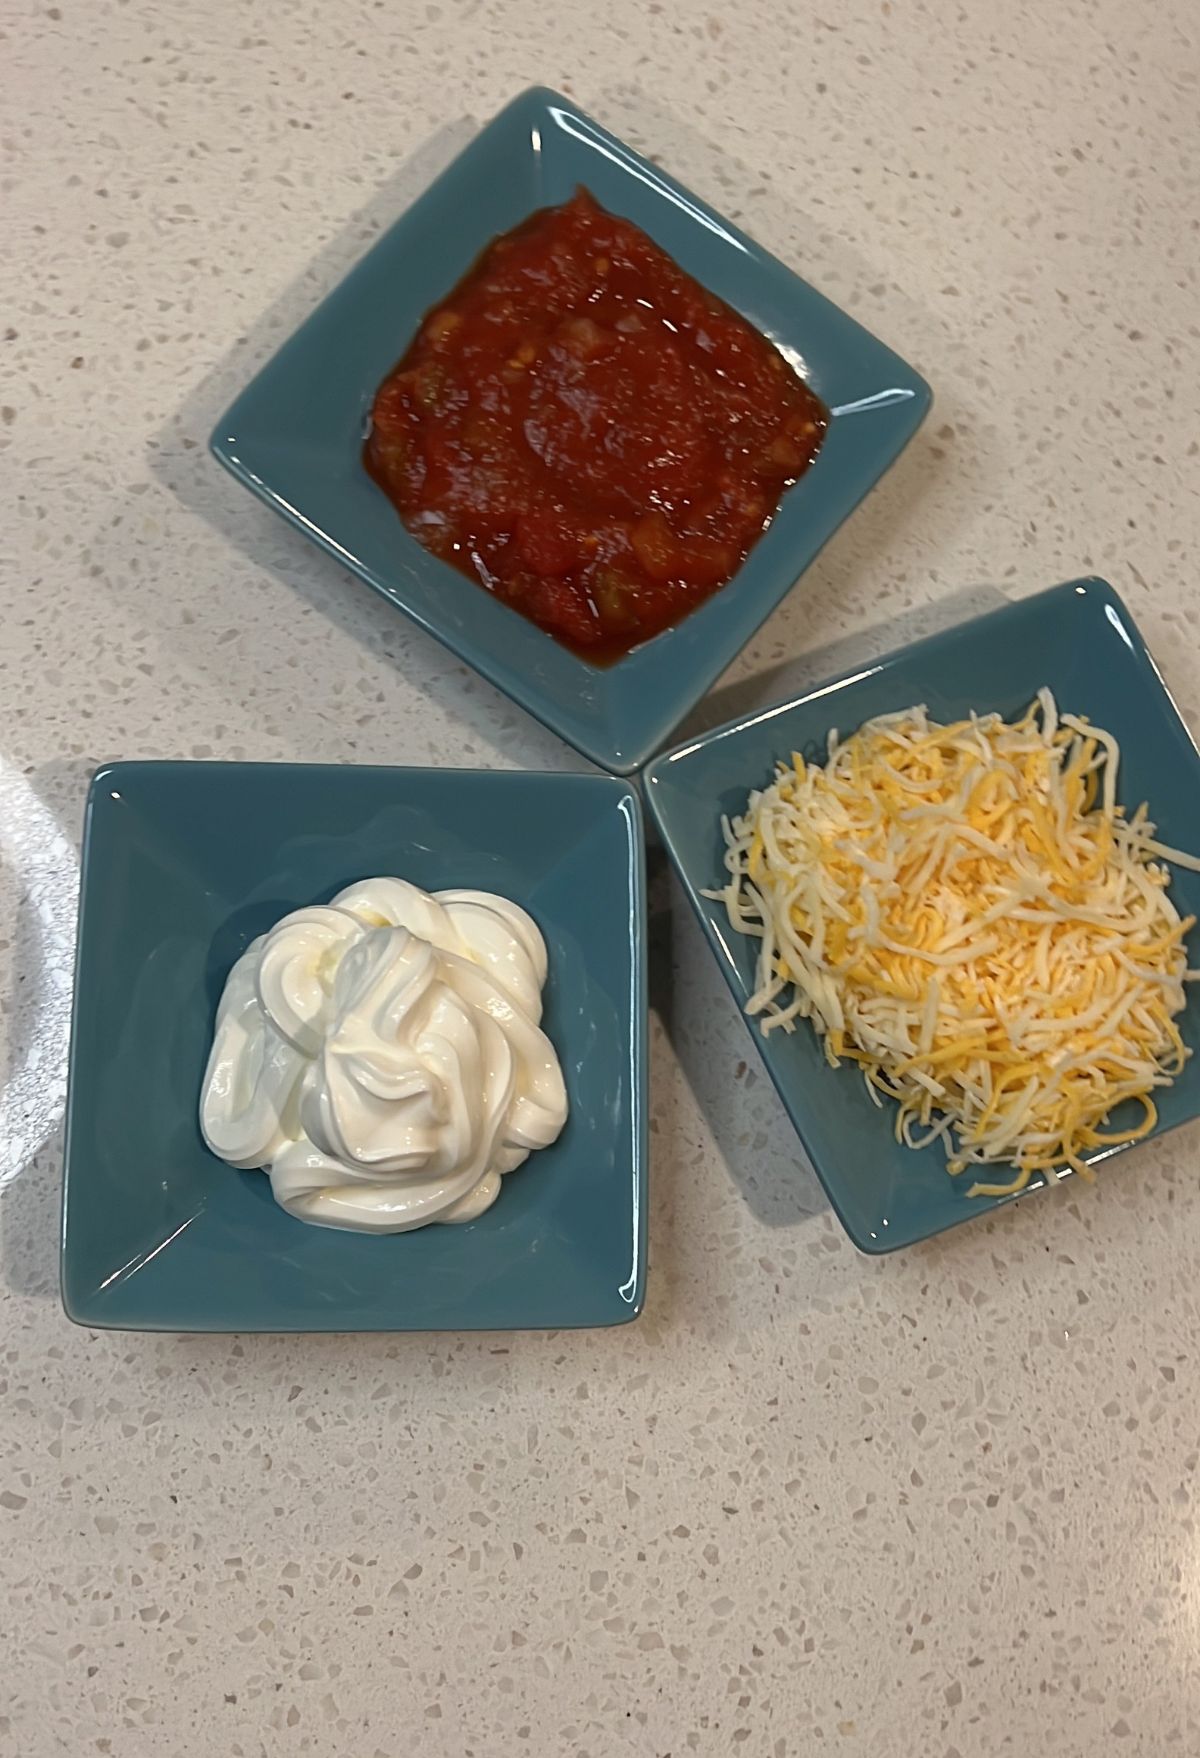 Three bowls with different food items: one with red salsa, one with sour cream, and one with shredded cheese.